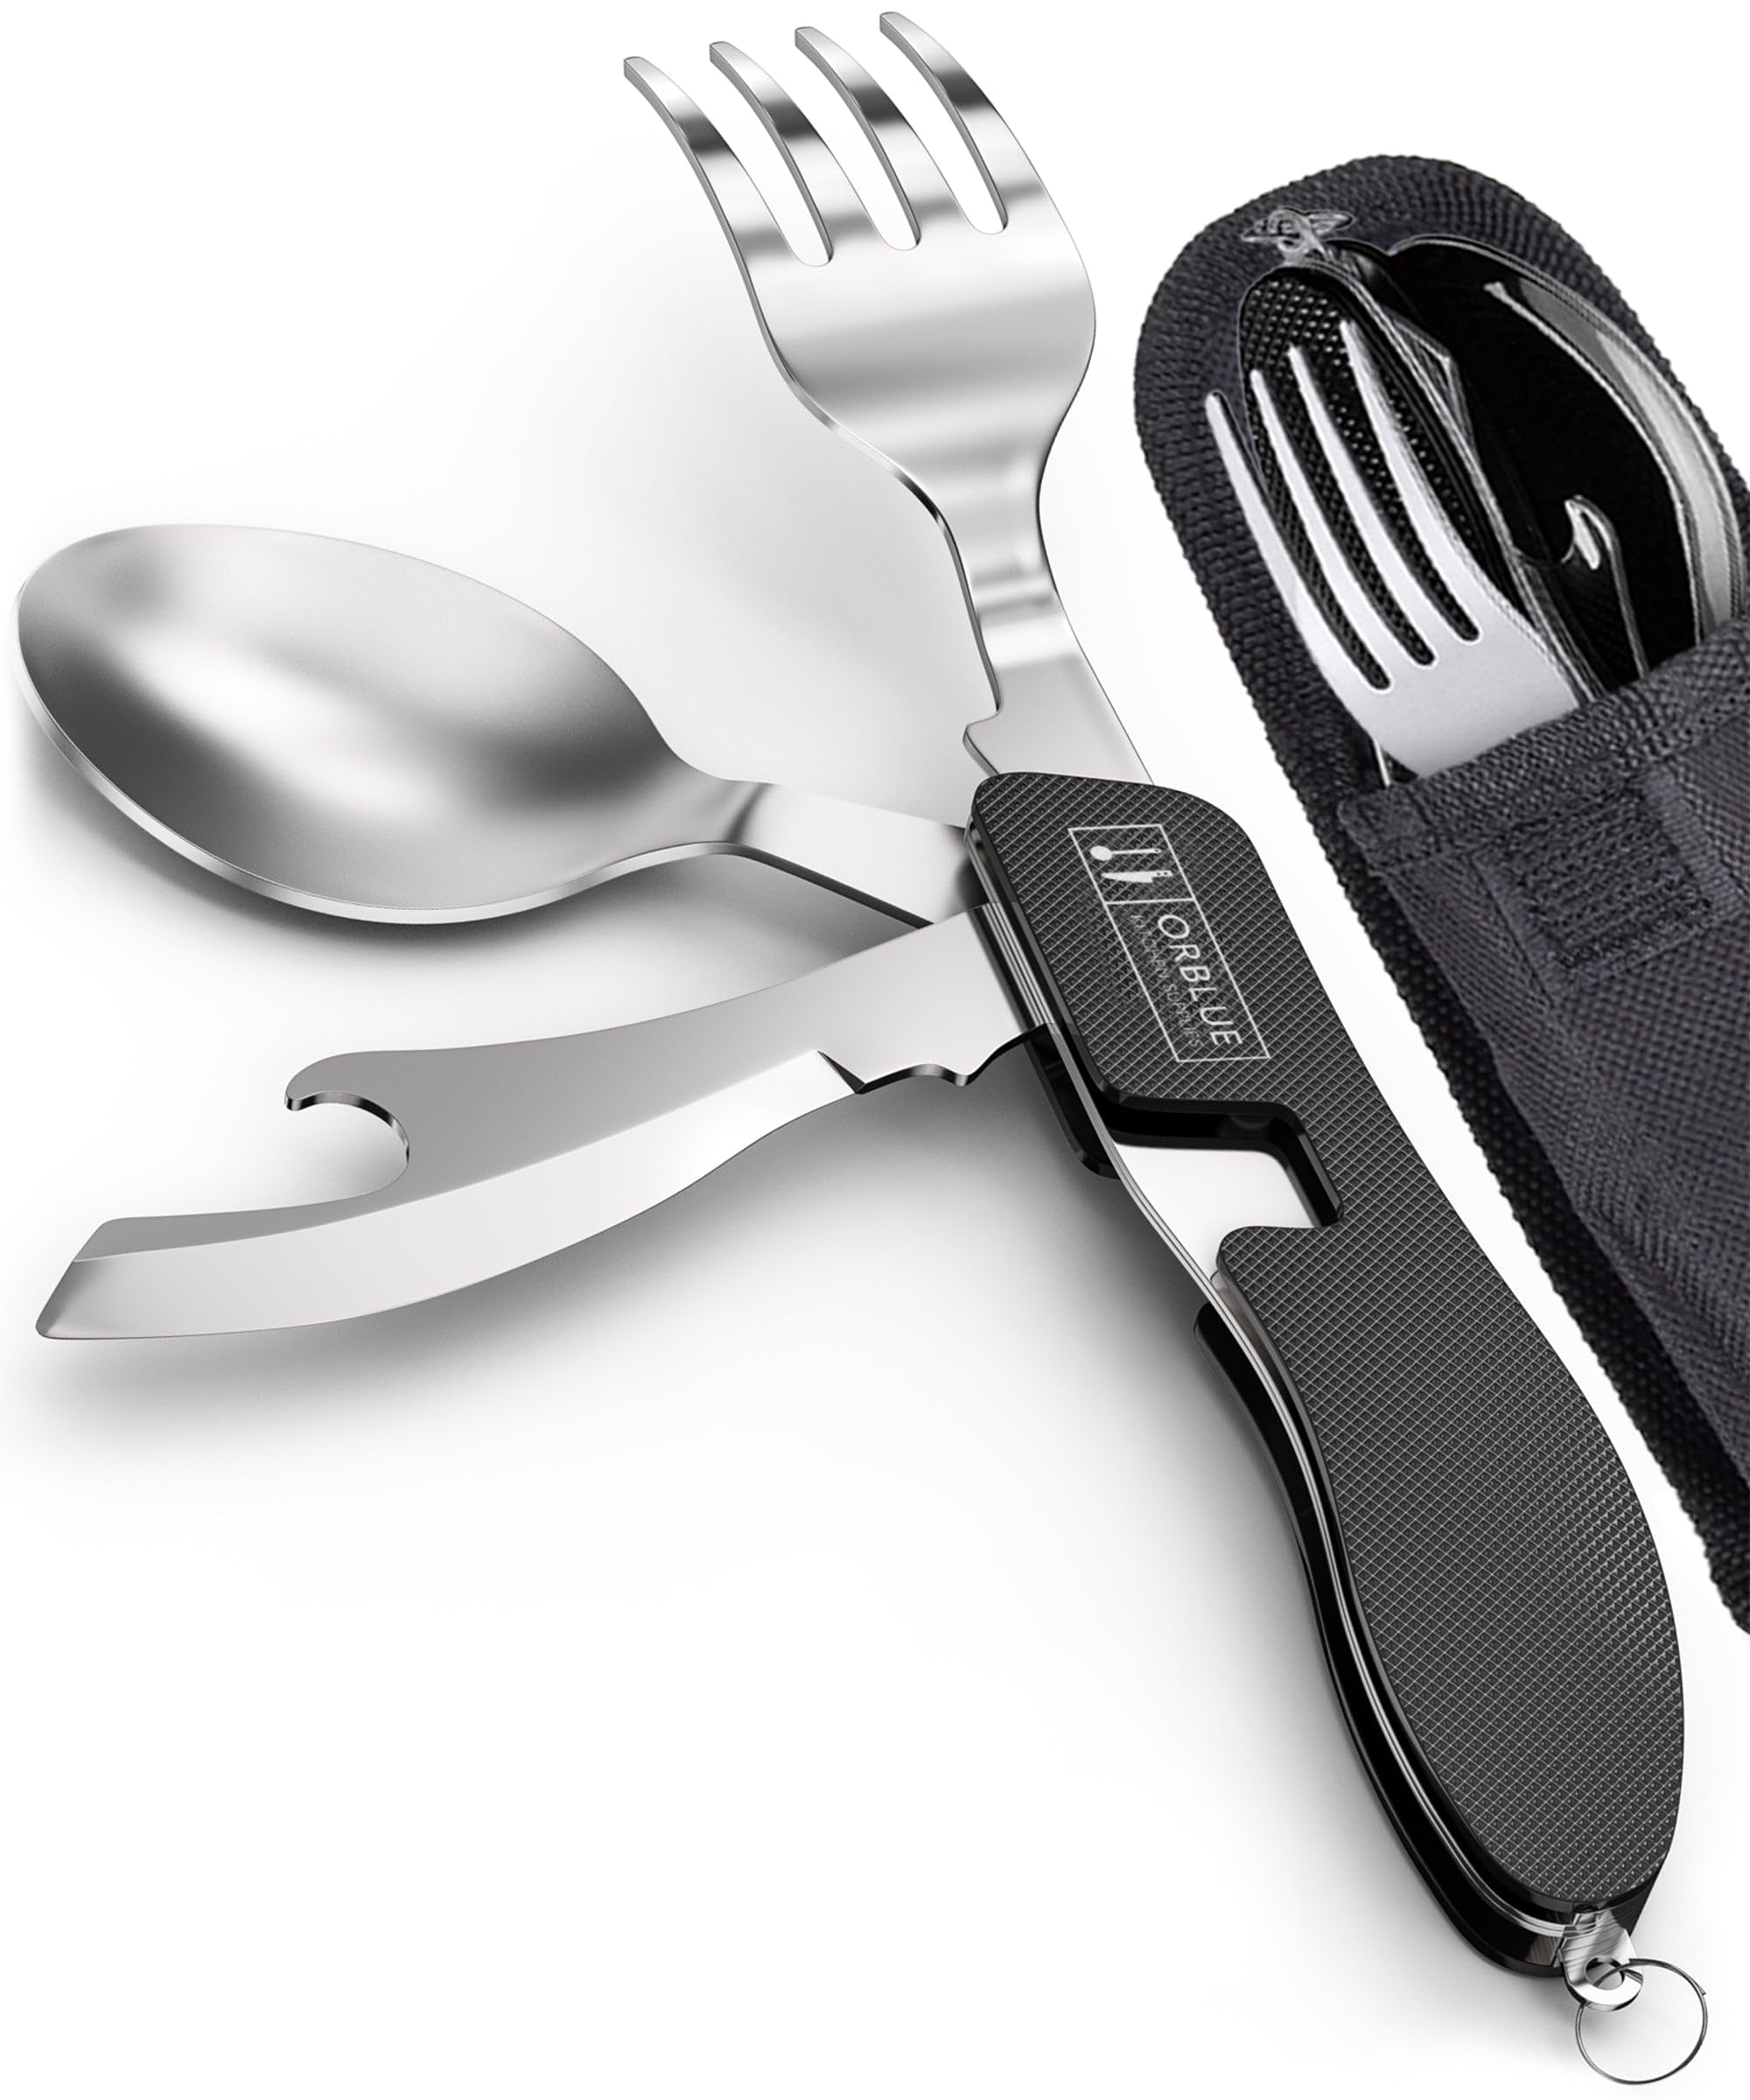 Camping Utensils - 4 in 1 Stainless Steel, Safety Locking Camping Acce